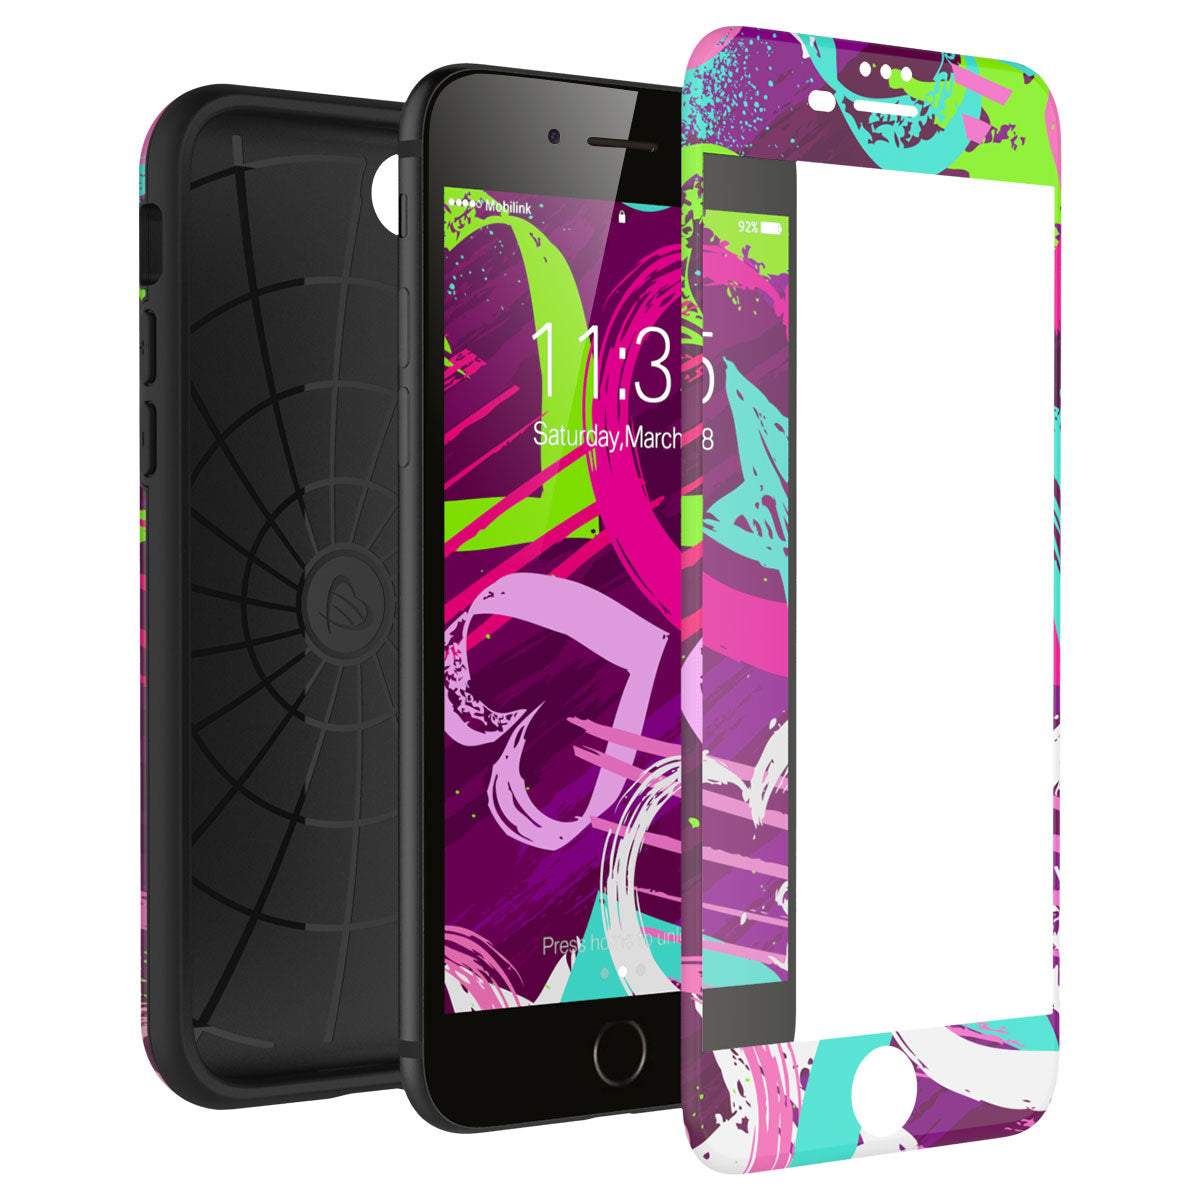 LUVVITT ARTOLOGY Case and Tempered Glass Set for iPhone 7/8 Plus - Bundle P001